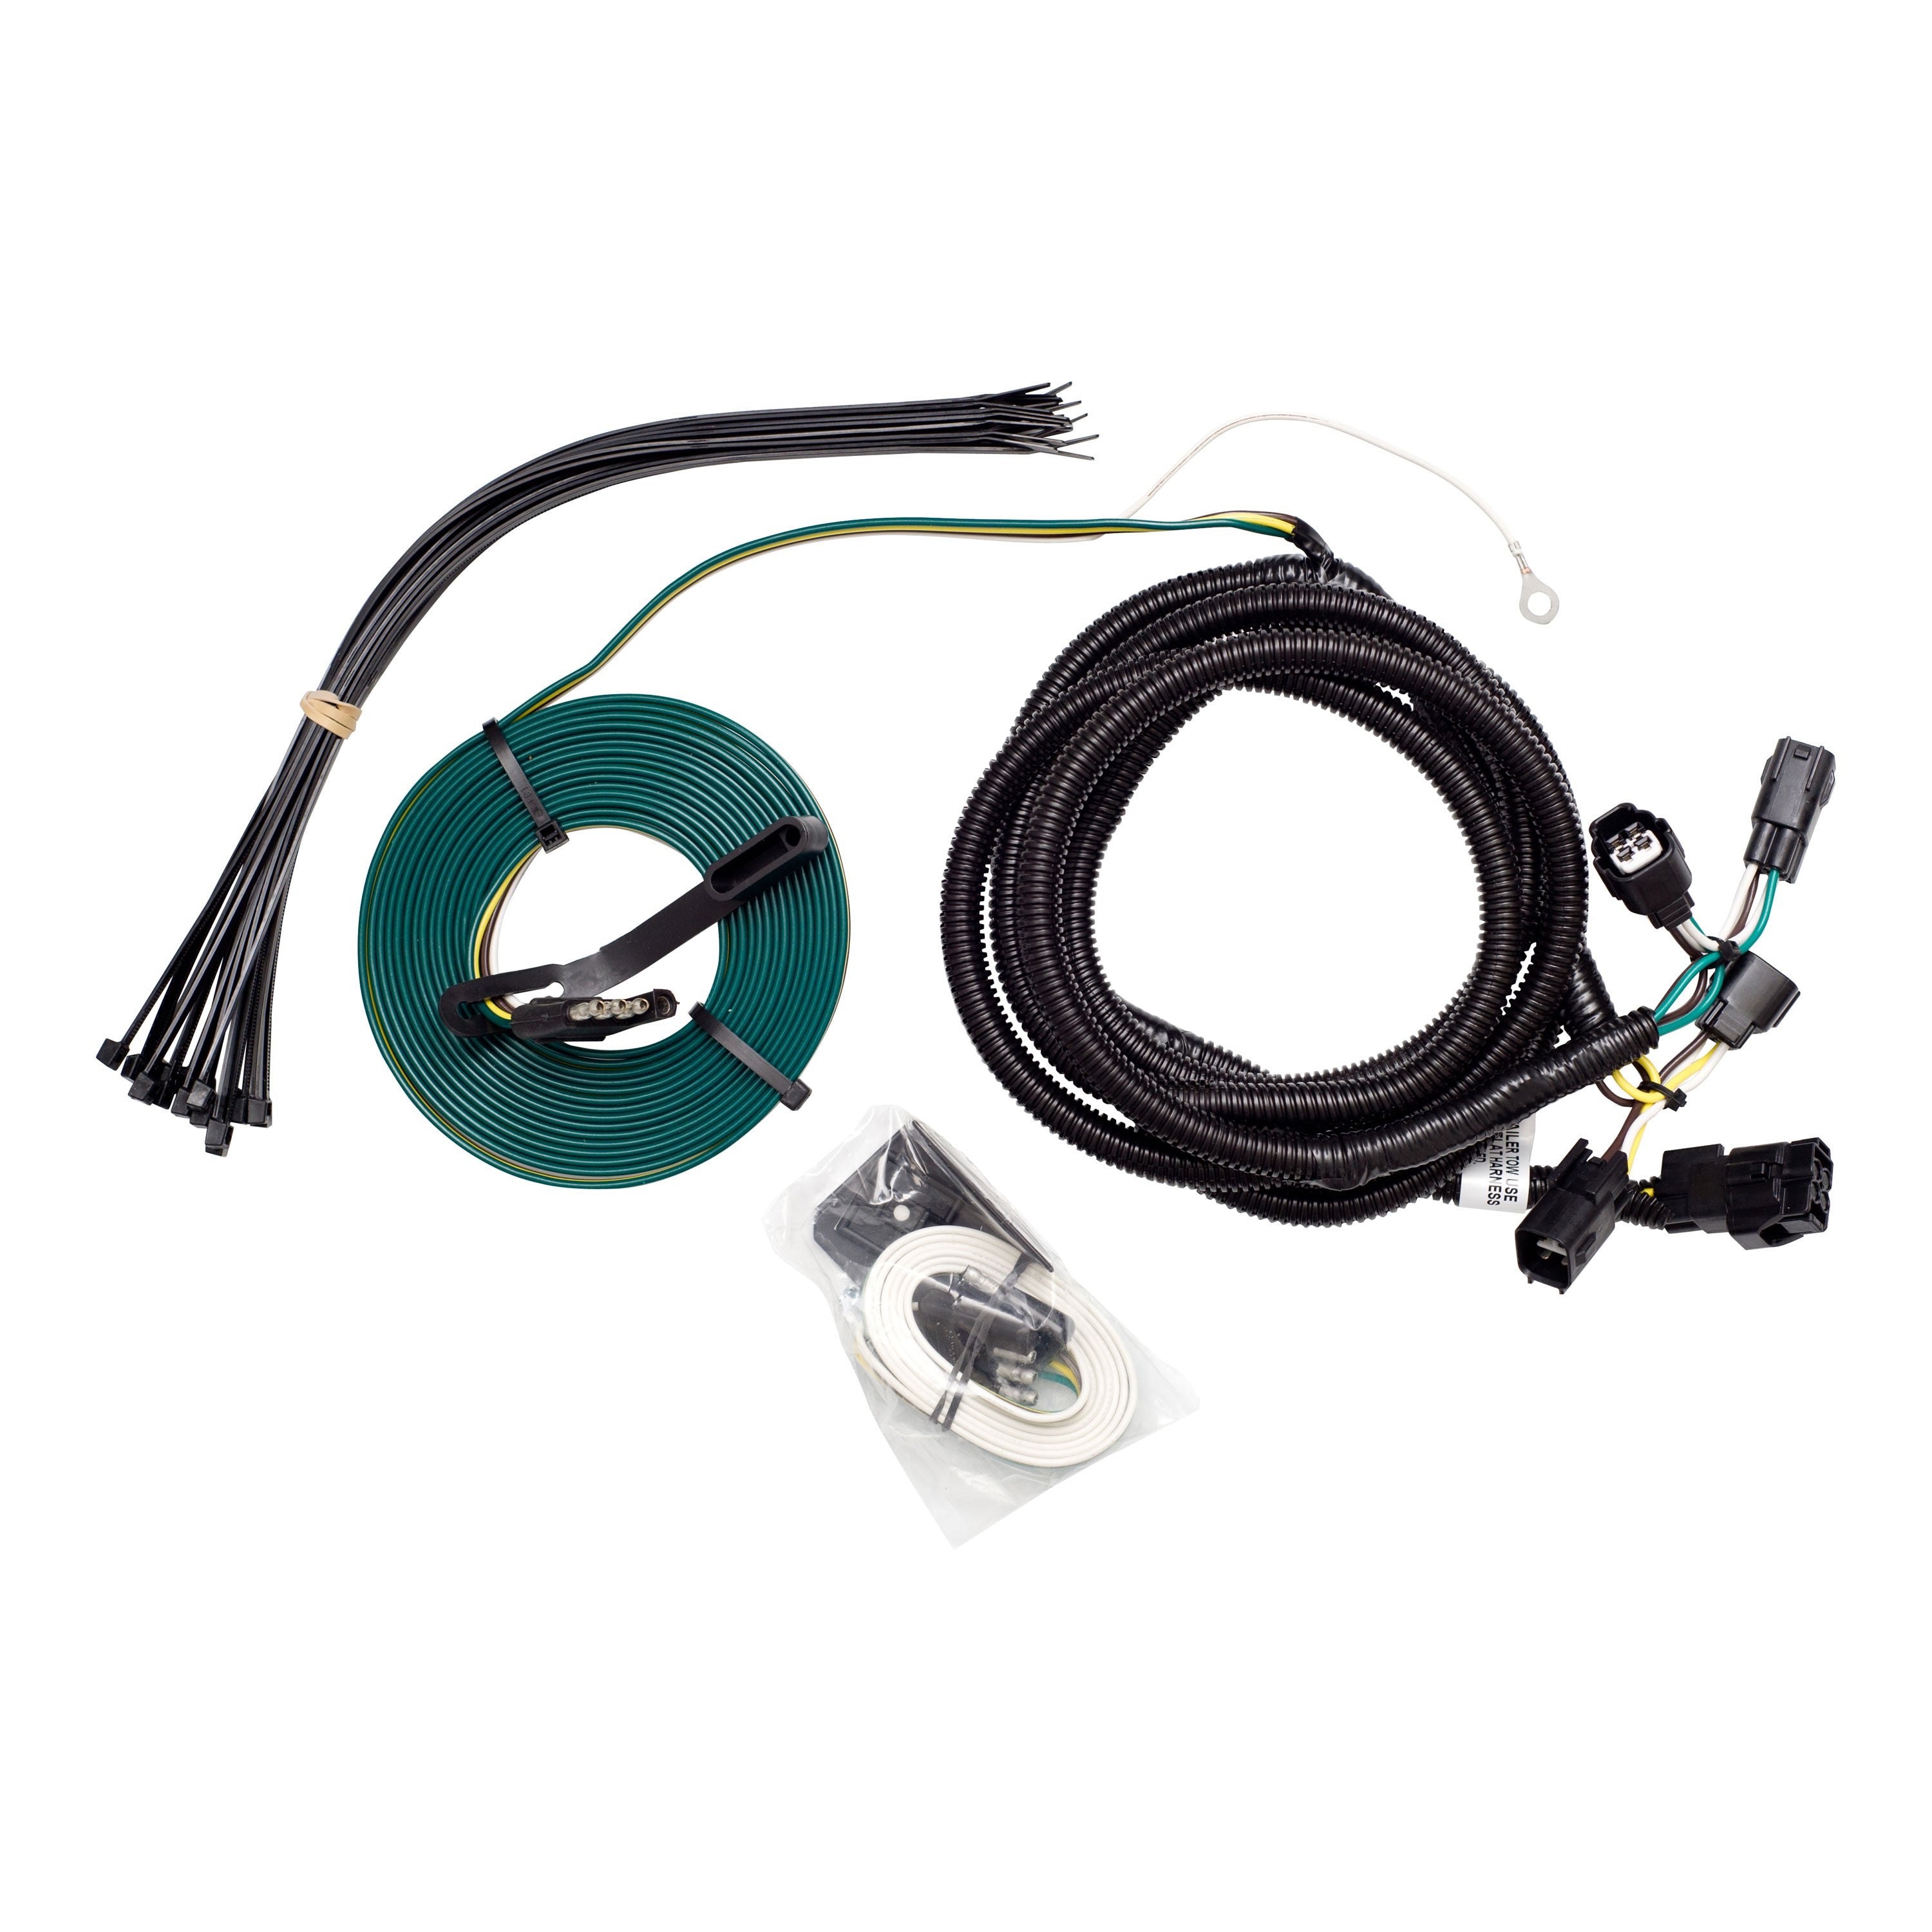 Demco 9523145 Towed Connector Vehicle Wiring Kit for Jeep Cherokee '07-'13